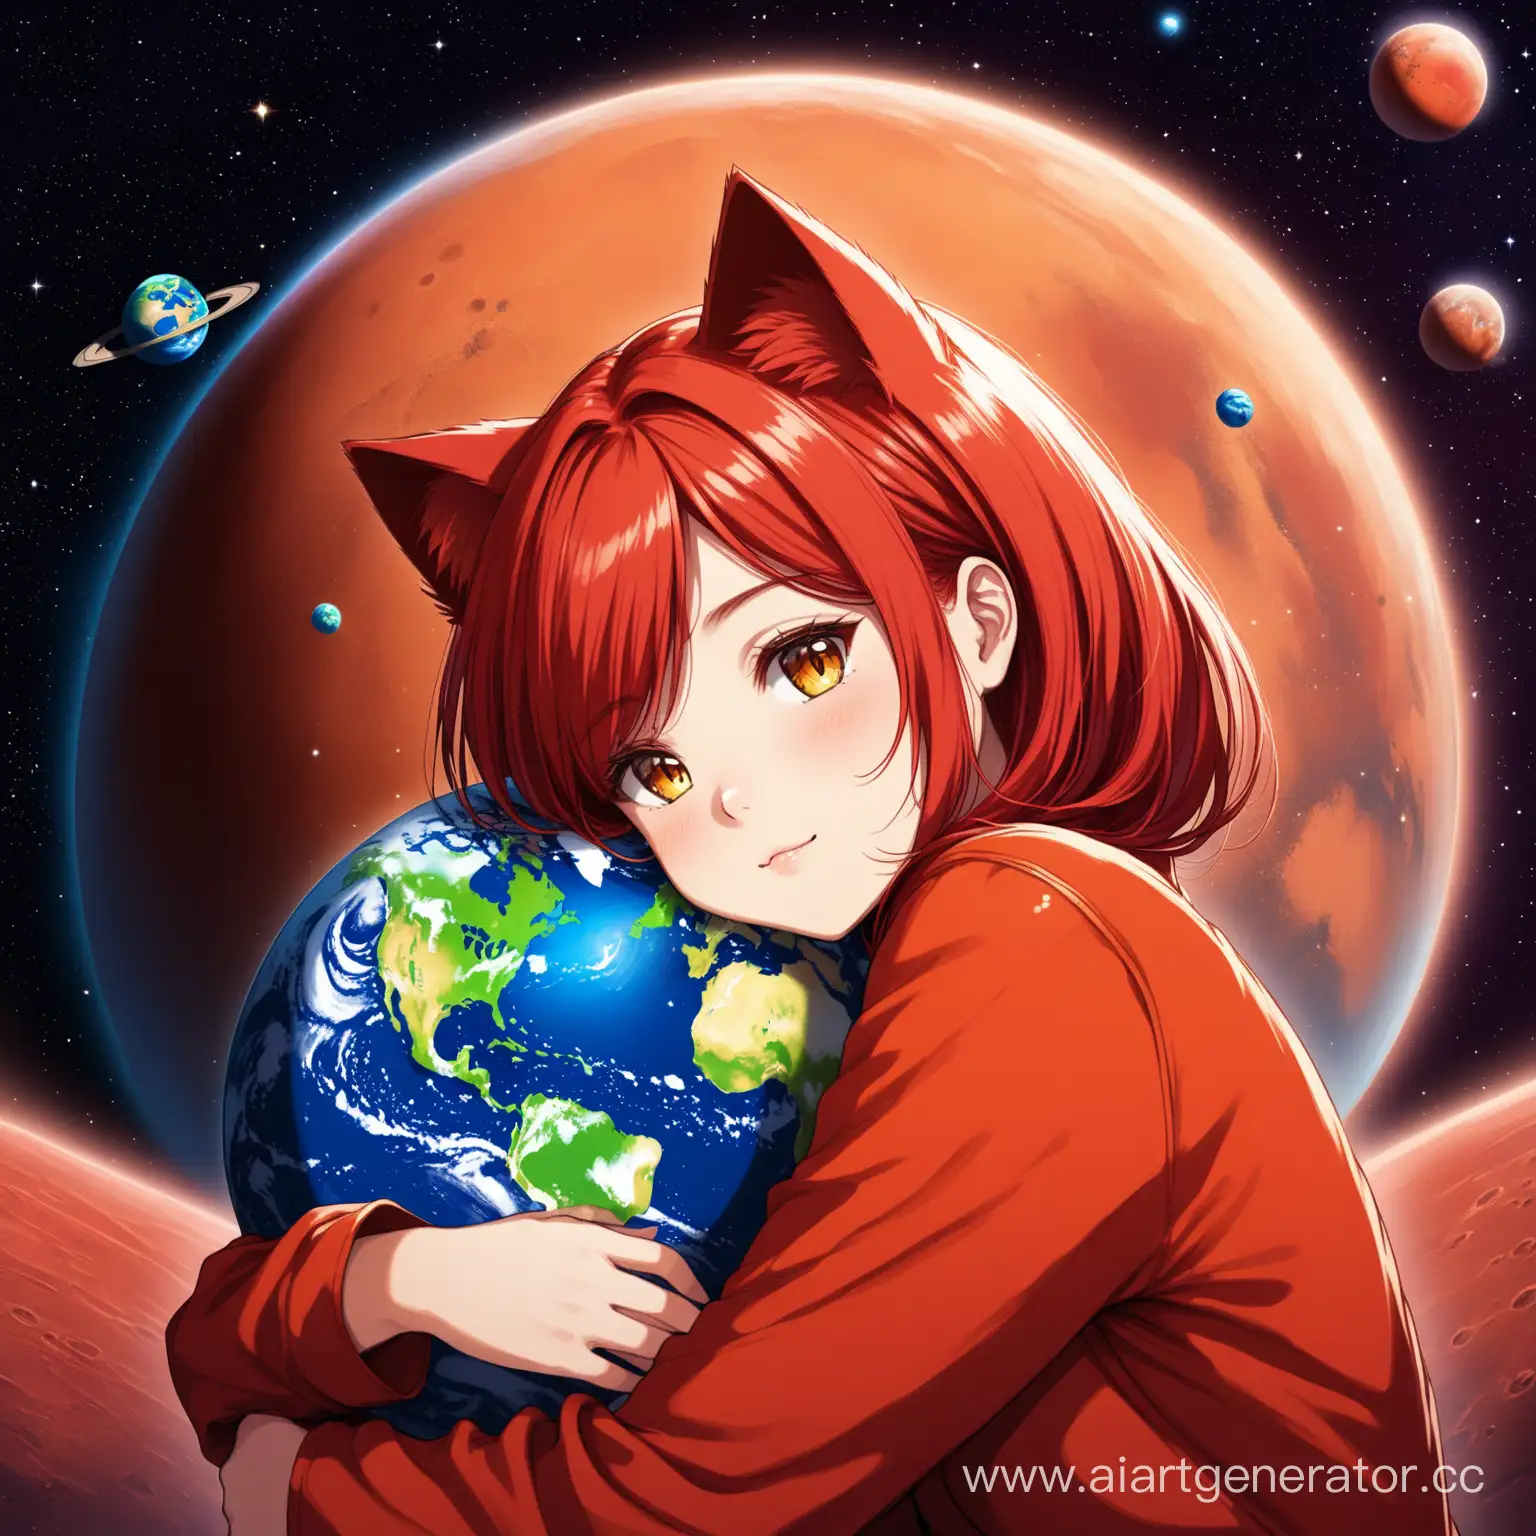 RedHaired-Girl-with-Cat-Ears-Embracing-Mars-in-Space